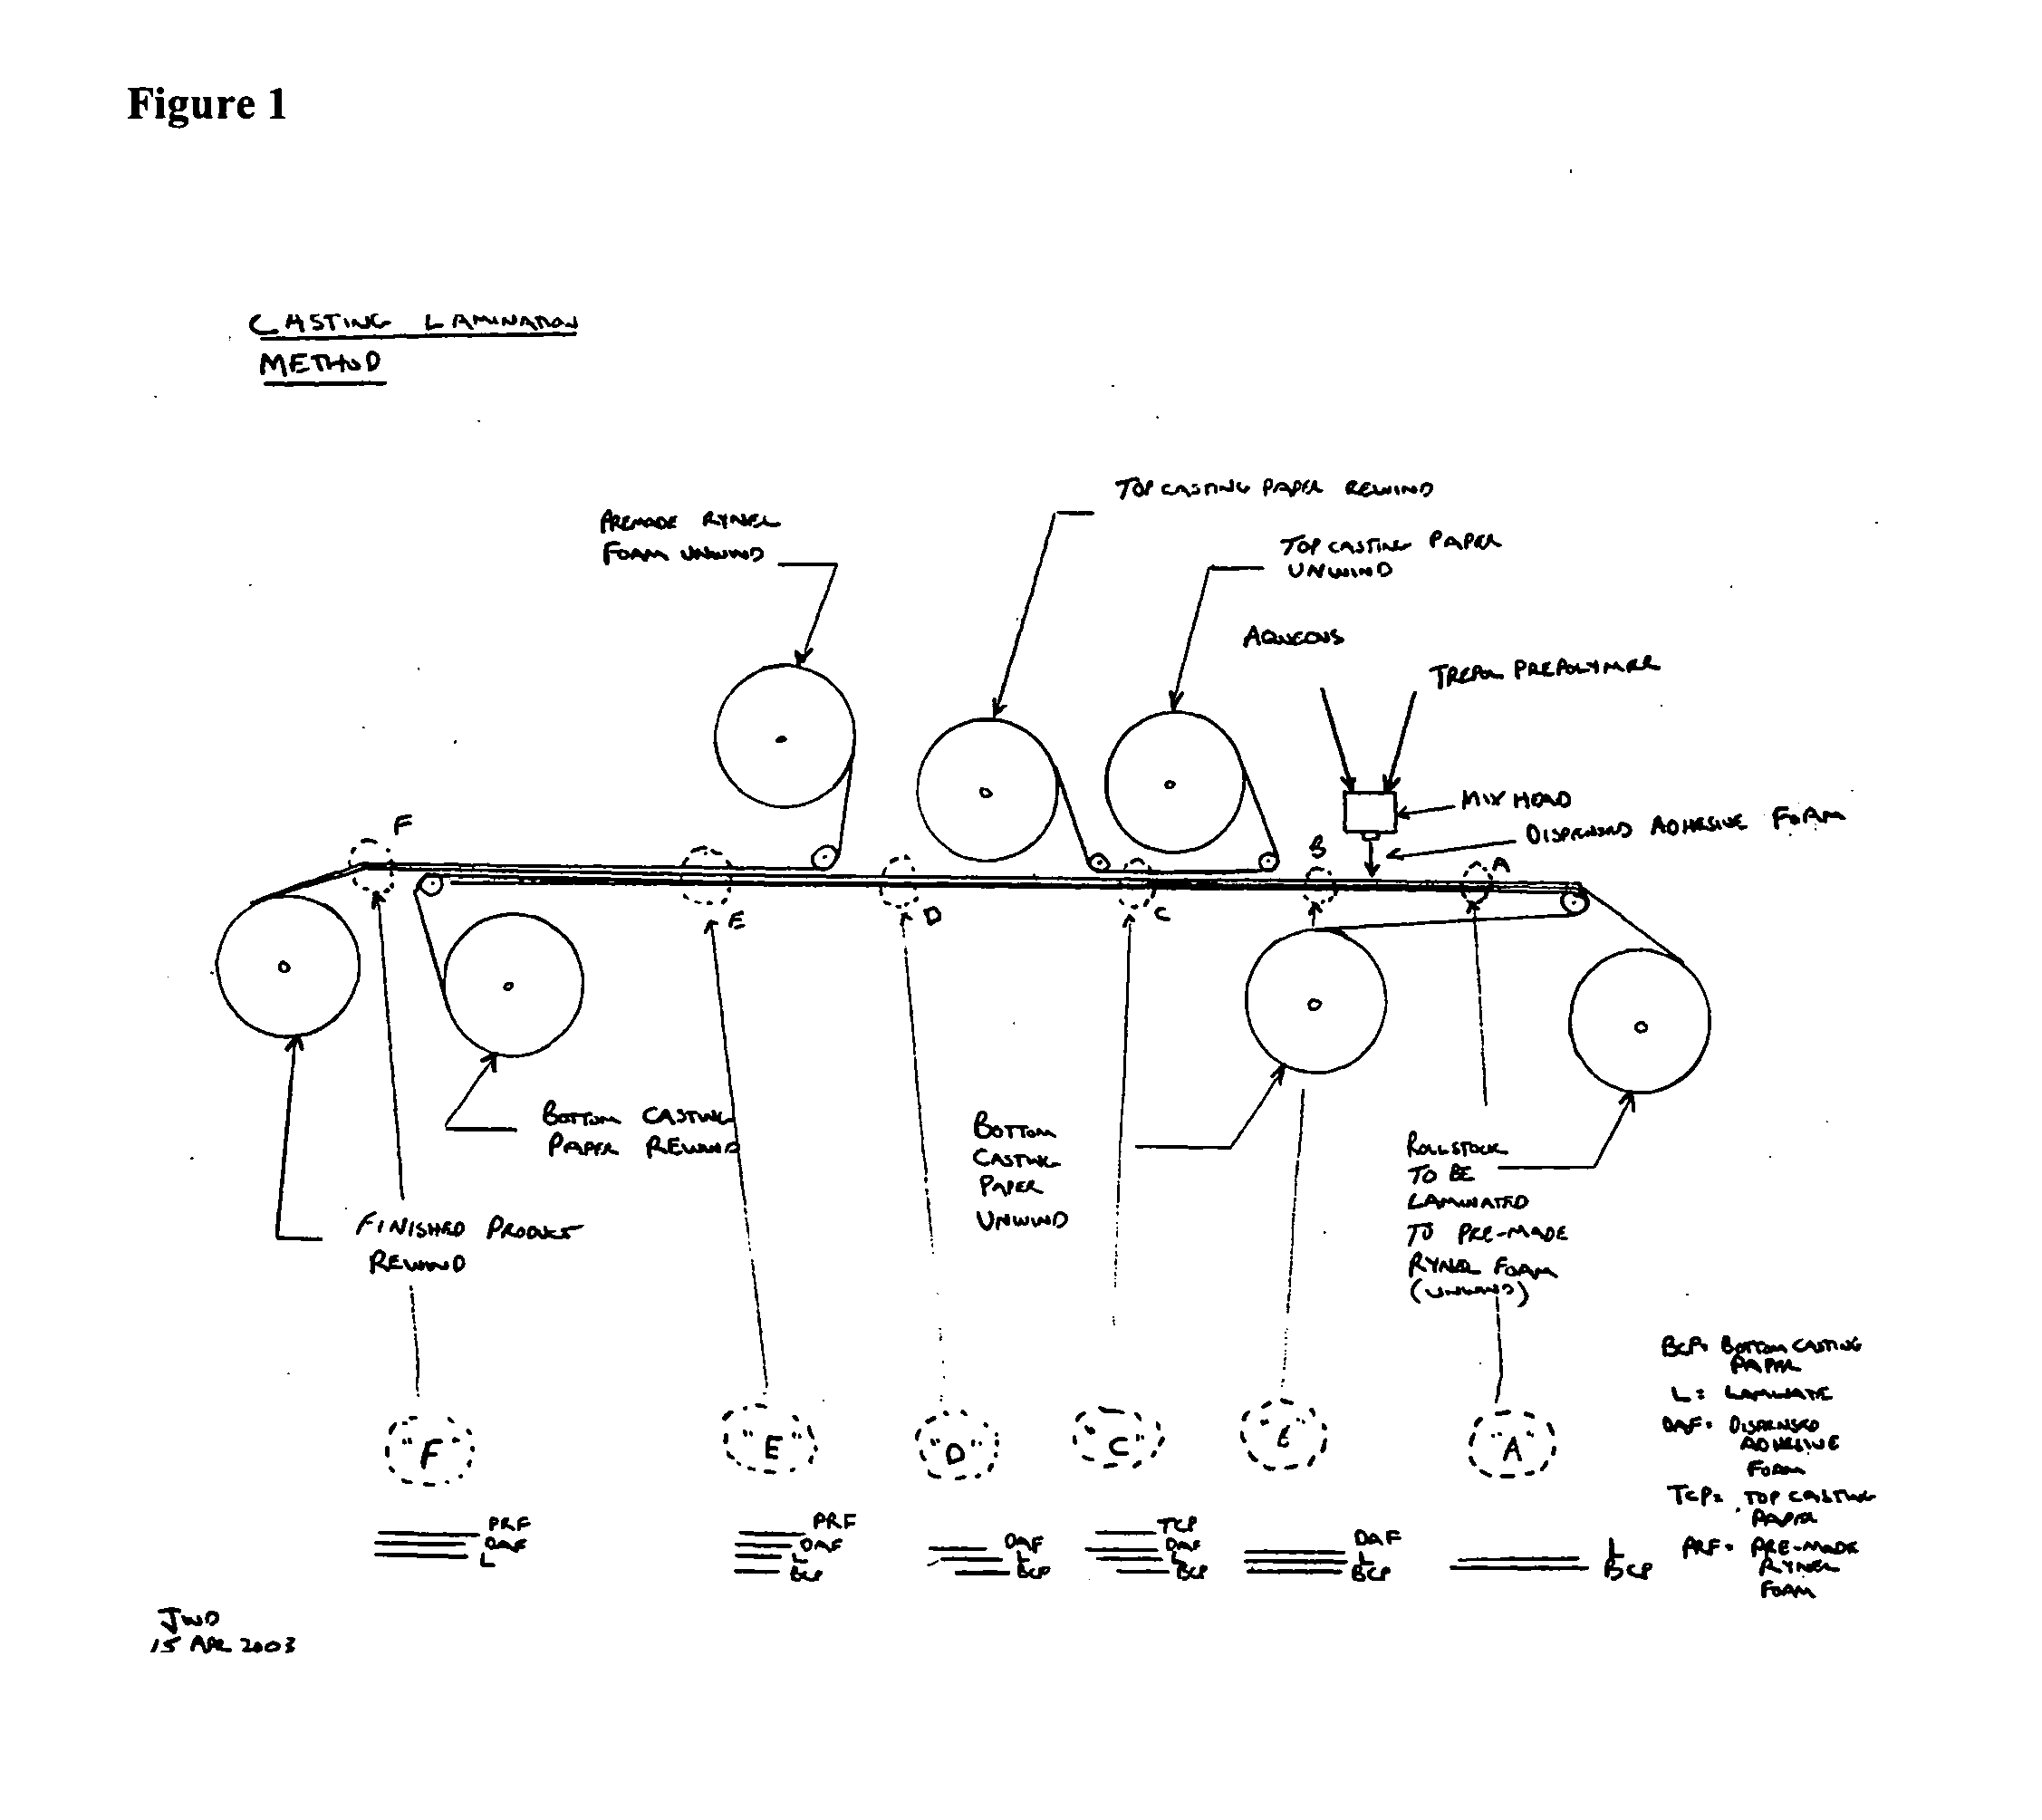 Apparatus and methods for the attachment of materials to polyurethane foam, and articles made using them